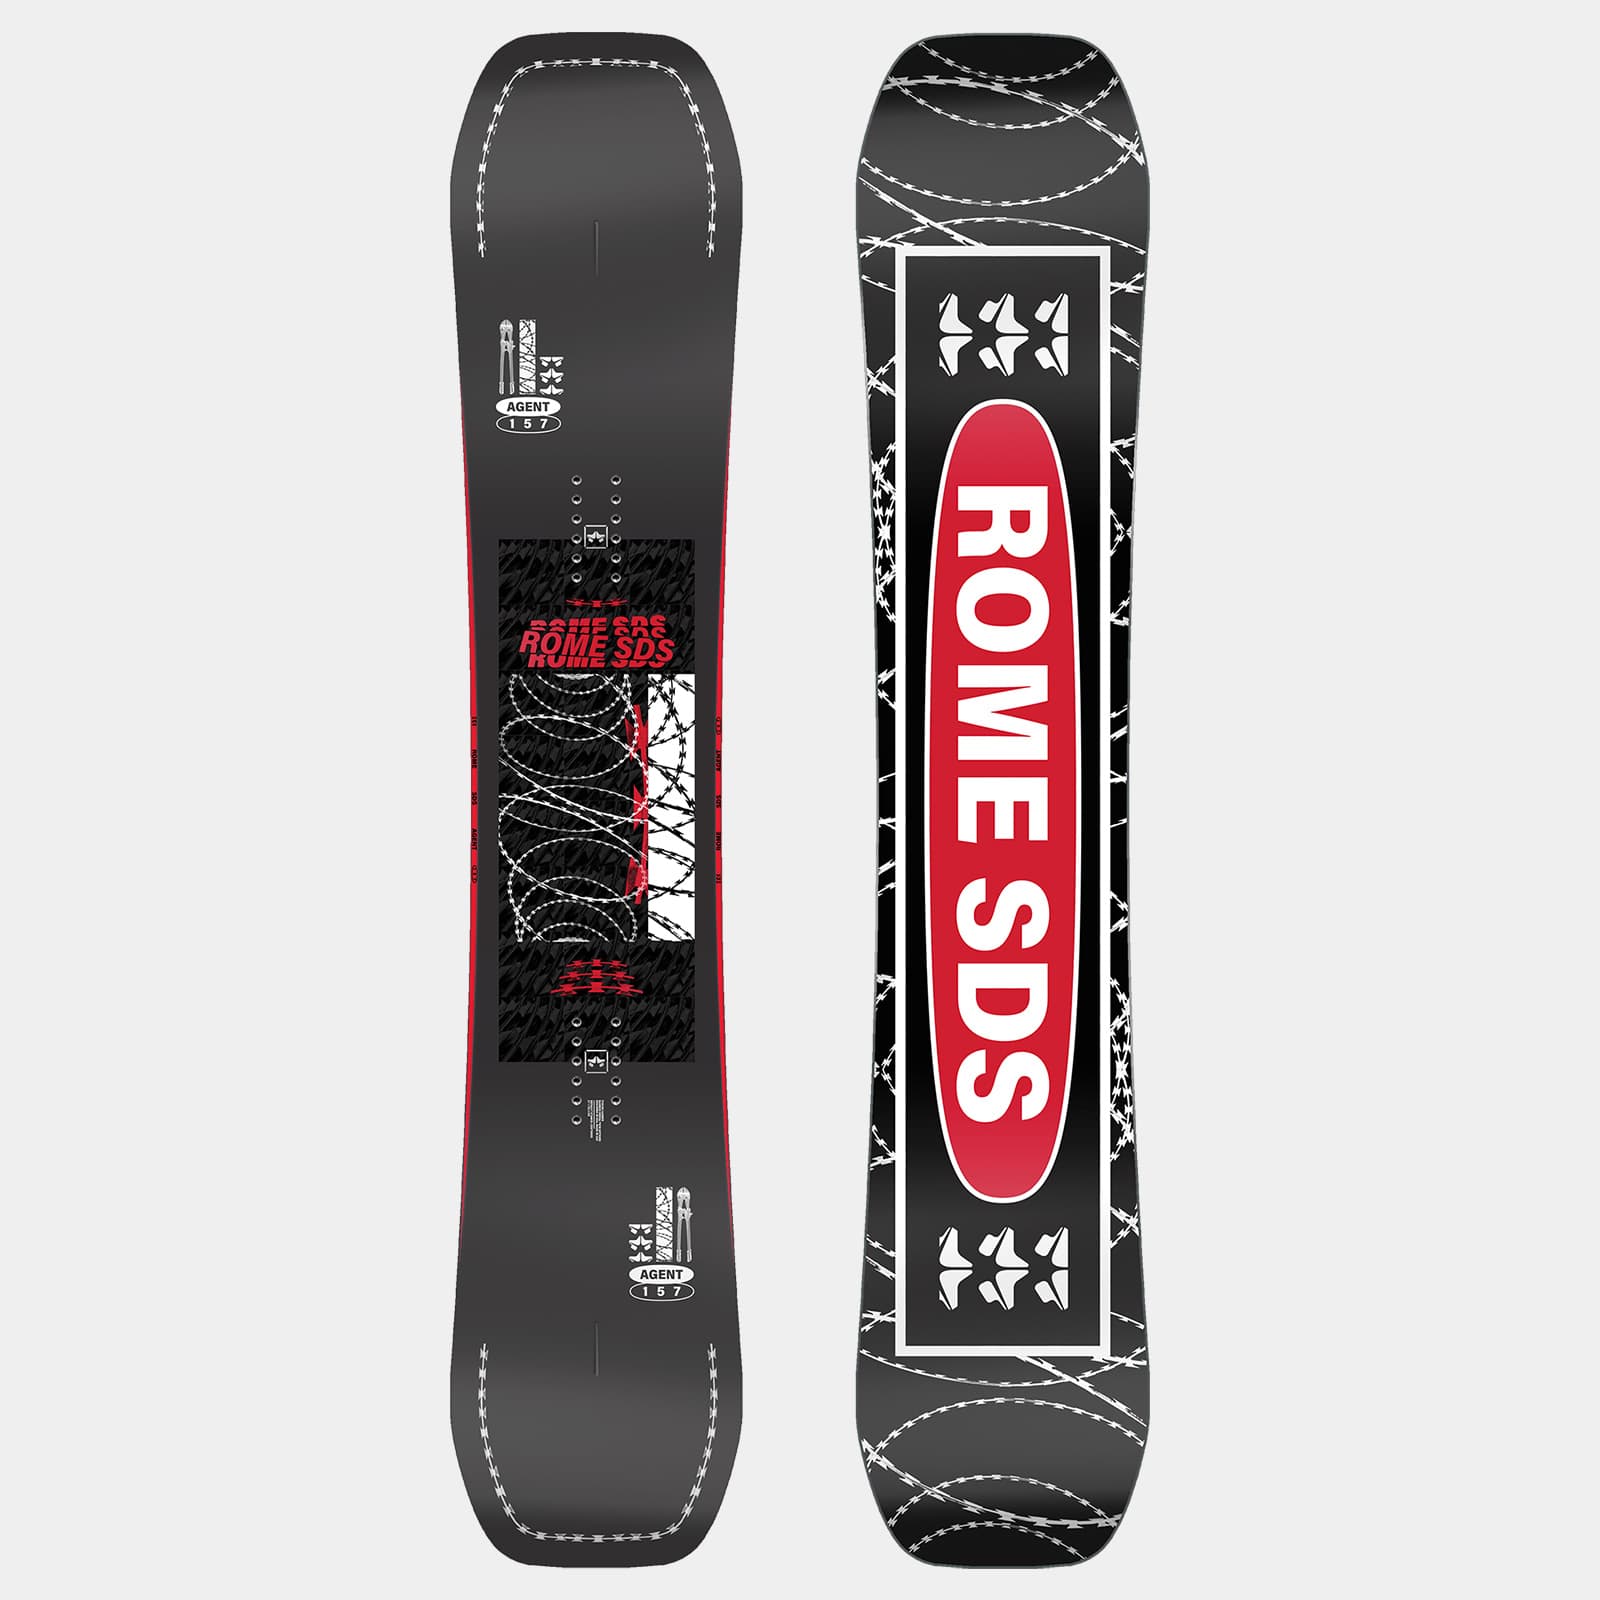 AGENT エージェント - 23/24 Board | Rome Snowboards 公式